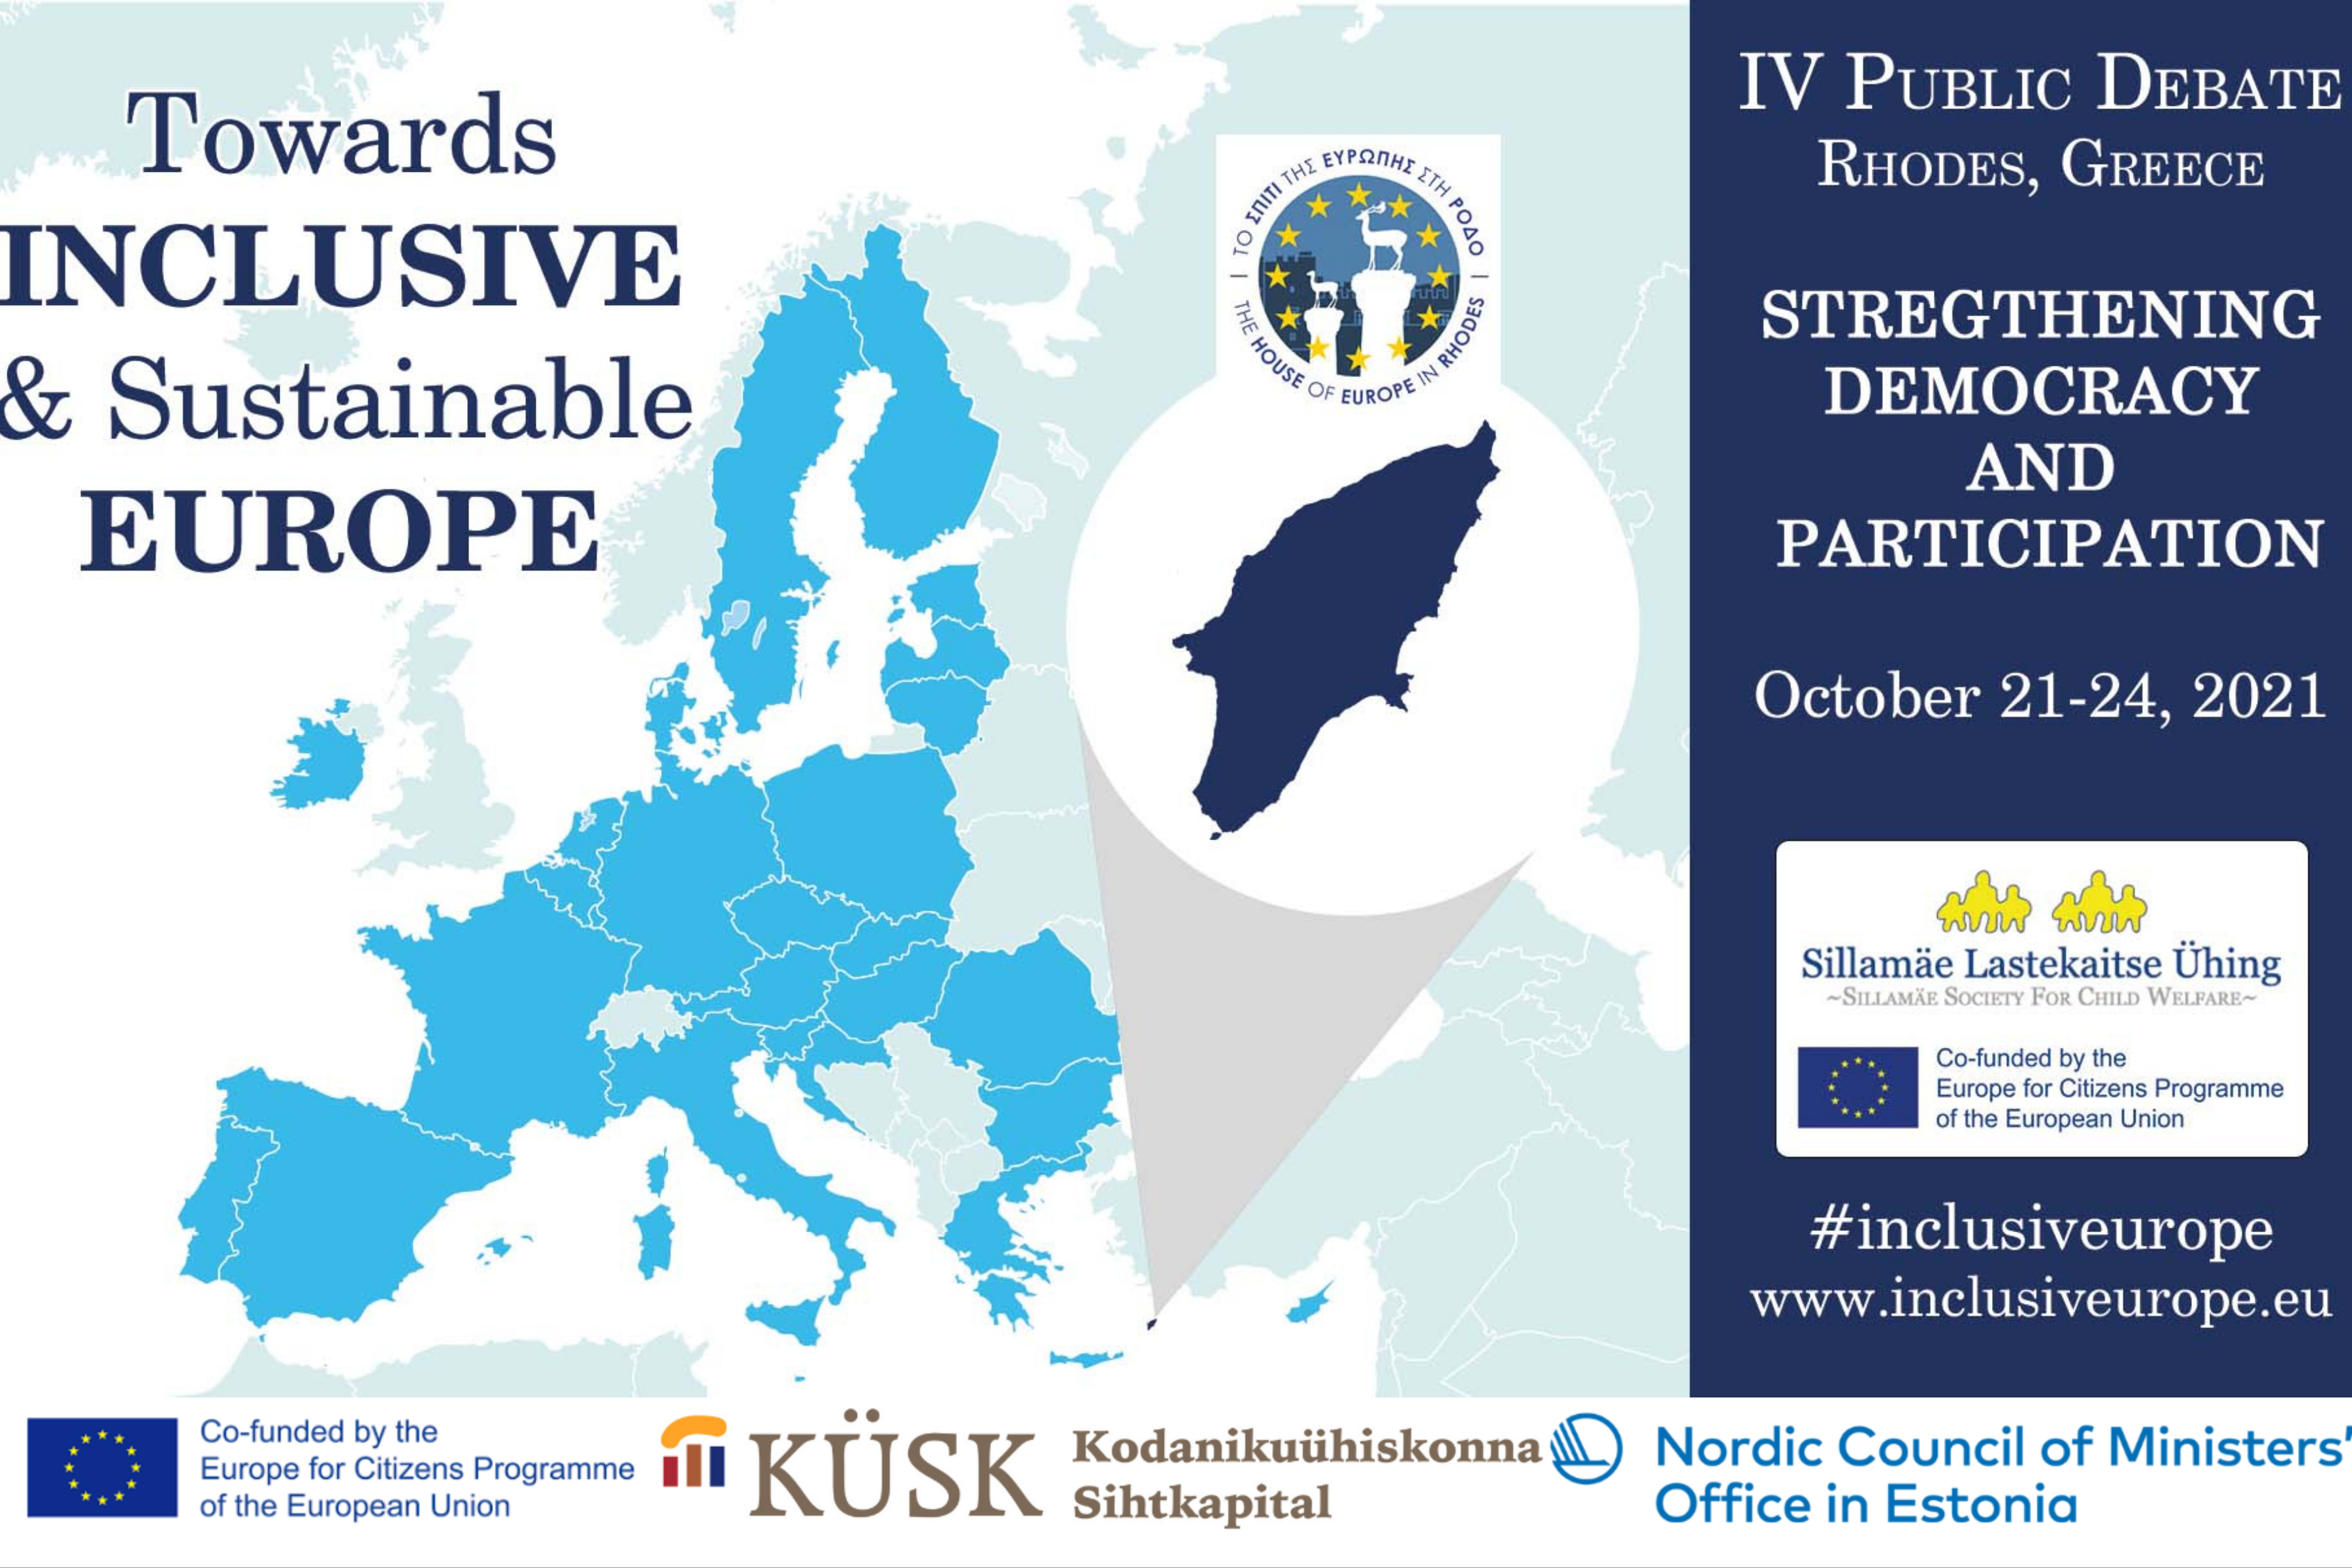 IV Public Debate: “Strengthening democracy and participation“ in Rhodes 21st – 24th of October